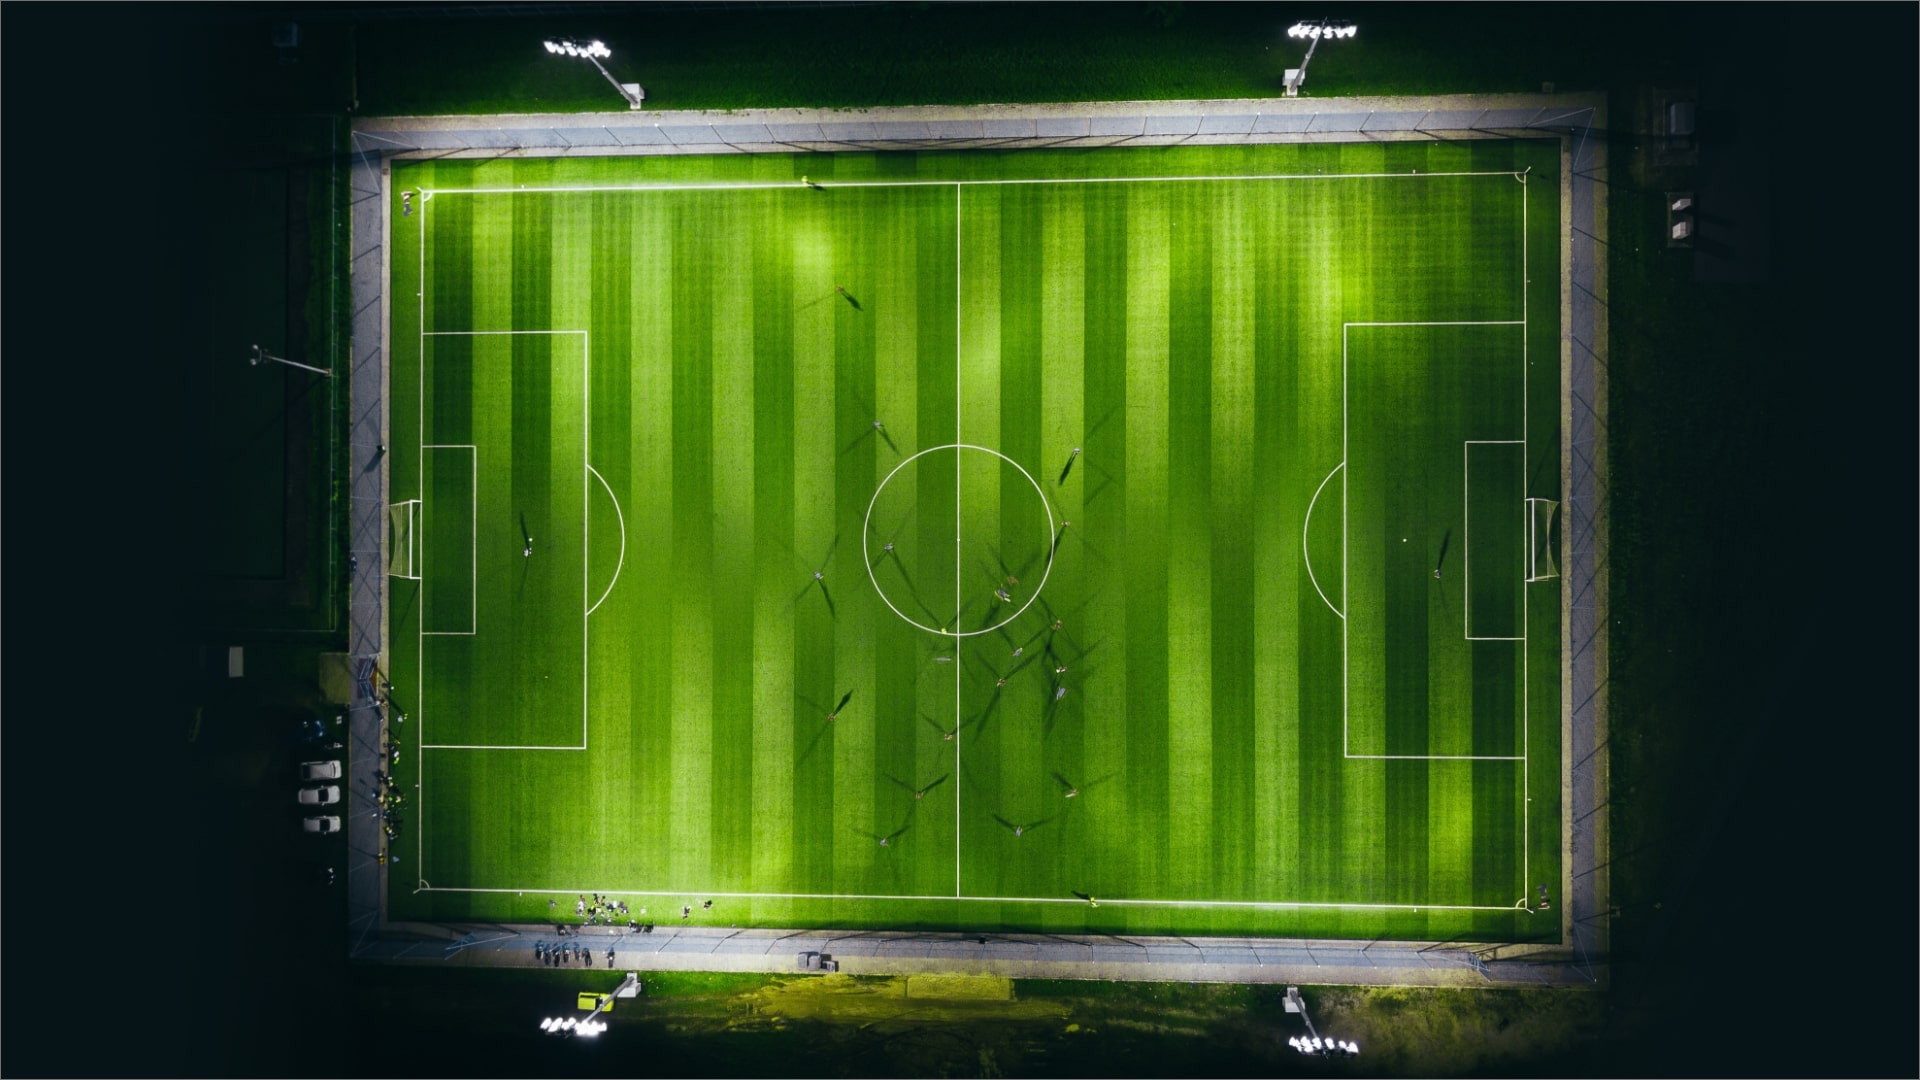 Top view of a football ground